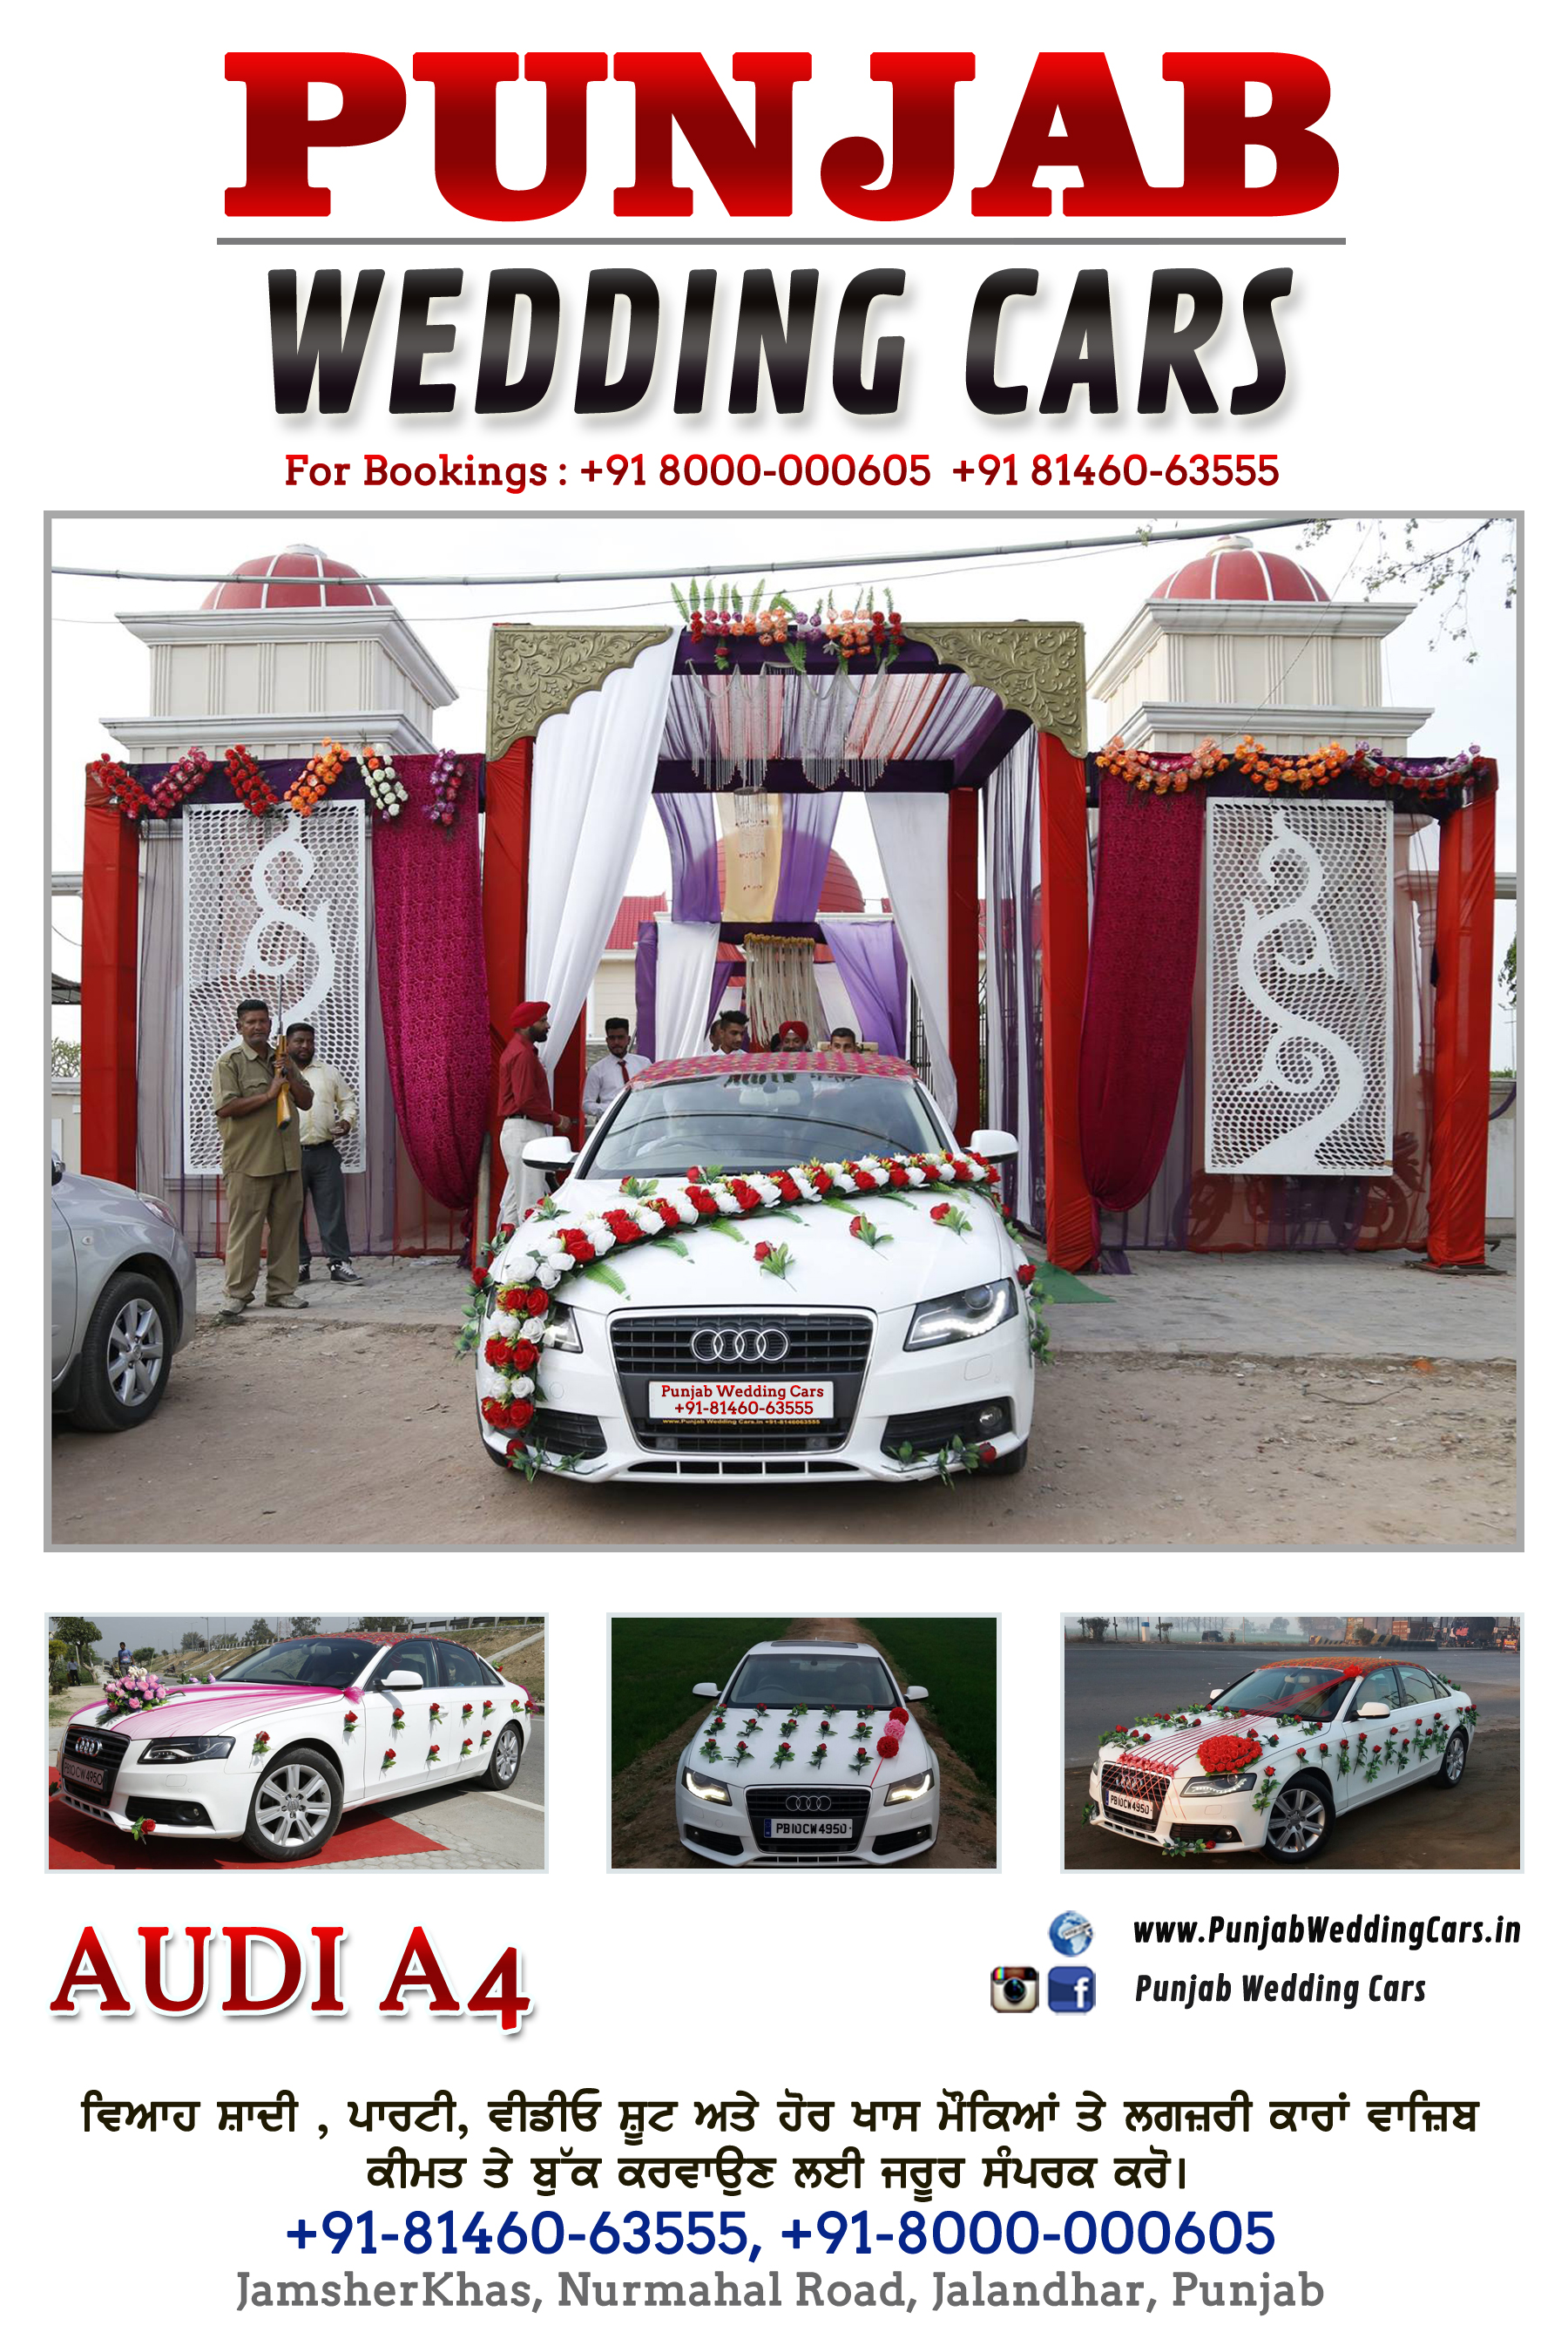 WEDDING CARS Luxury Audi Cars for rent on weddings, parties and video shoots Luxury Audi Cars for rent on weddings, parties and video shoots for wedding rental in Punjab, India